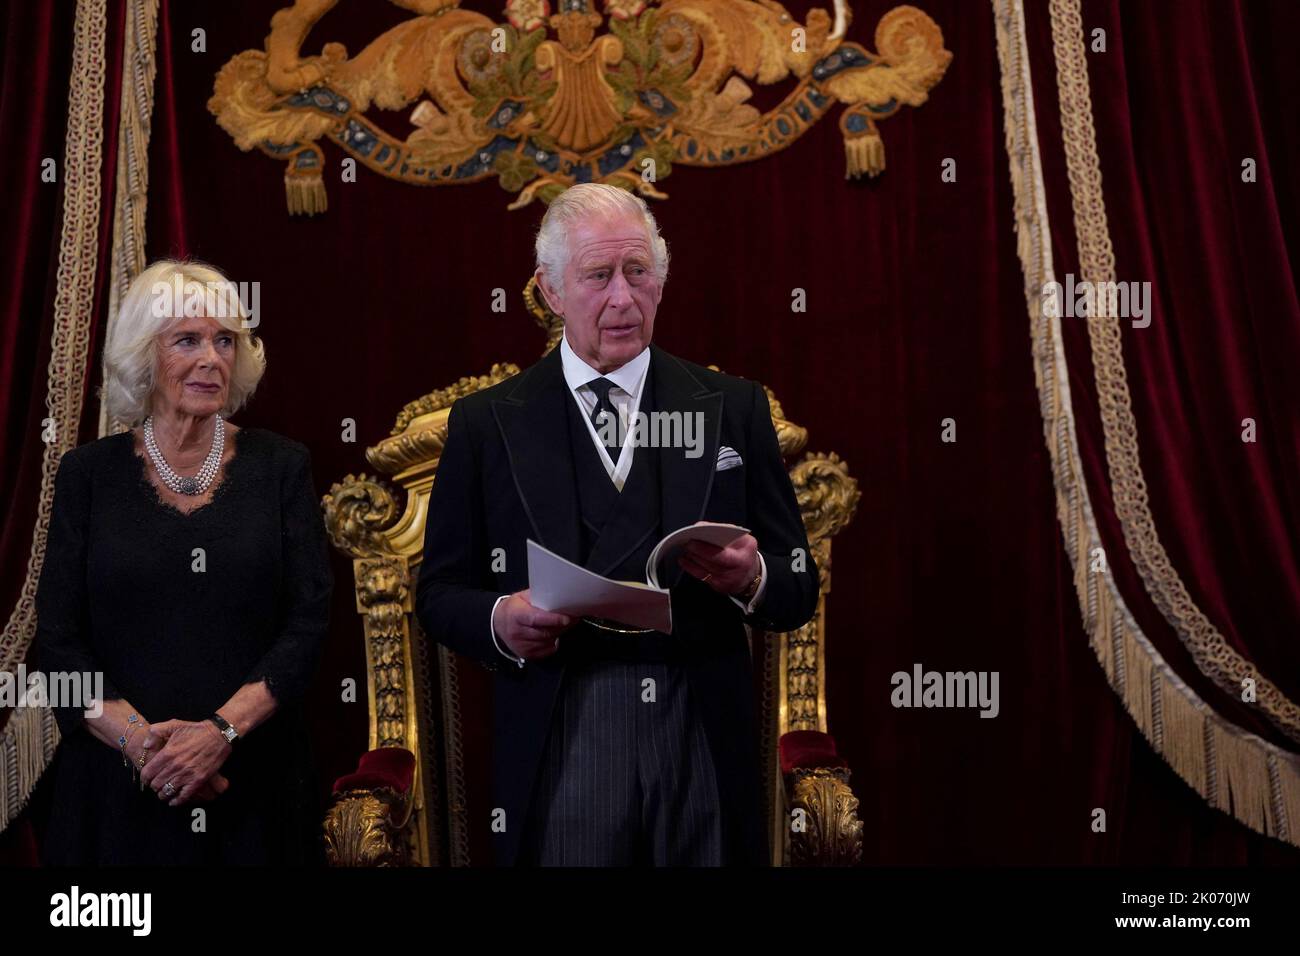 King Charles III proclaimed Britain's monarch after queen's death